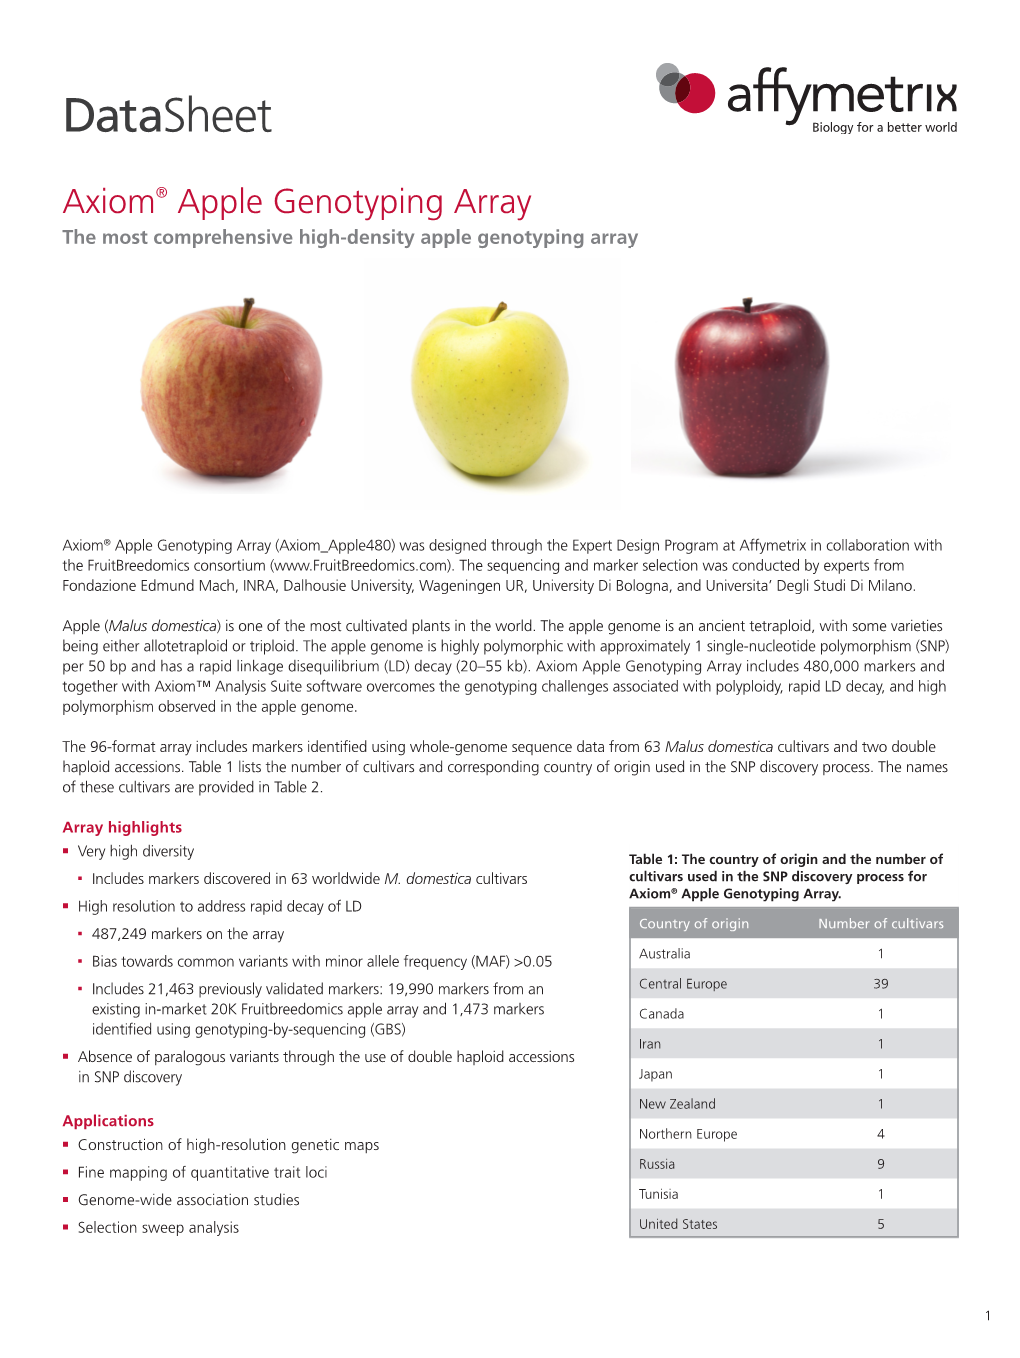 Axiom® Apple Genotyping Array the Most Comprehensive High-Density Apple Genotyping Array